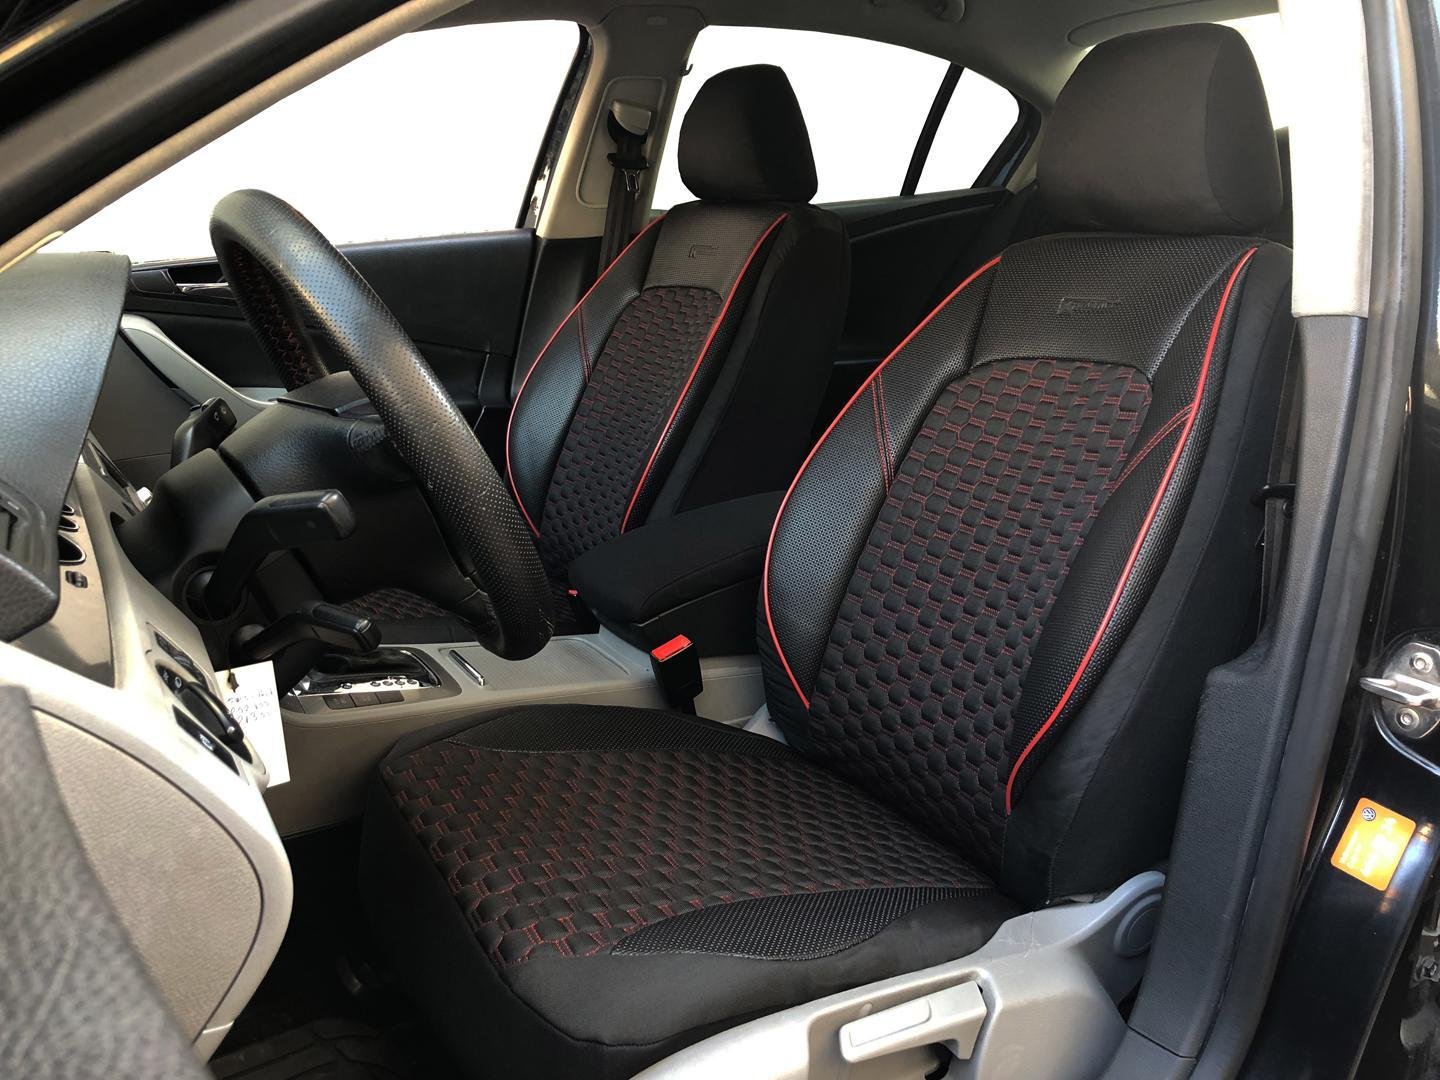 Car seat covers protectors for Suzuki SX4 black-red V16 front seats